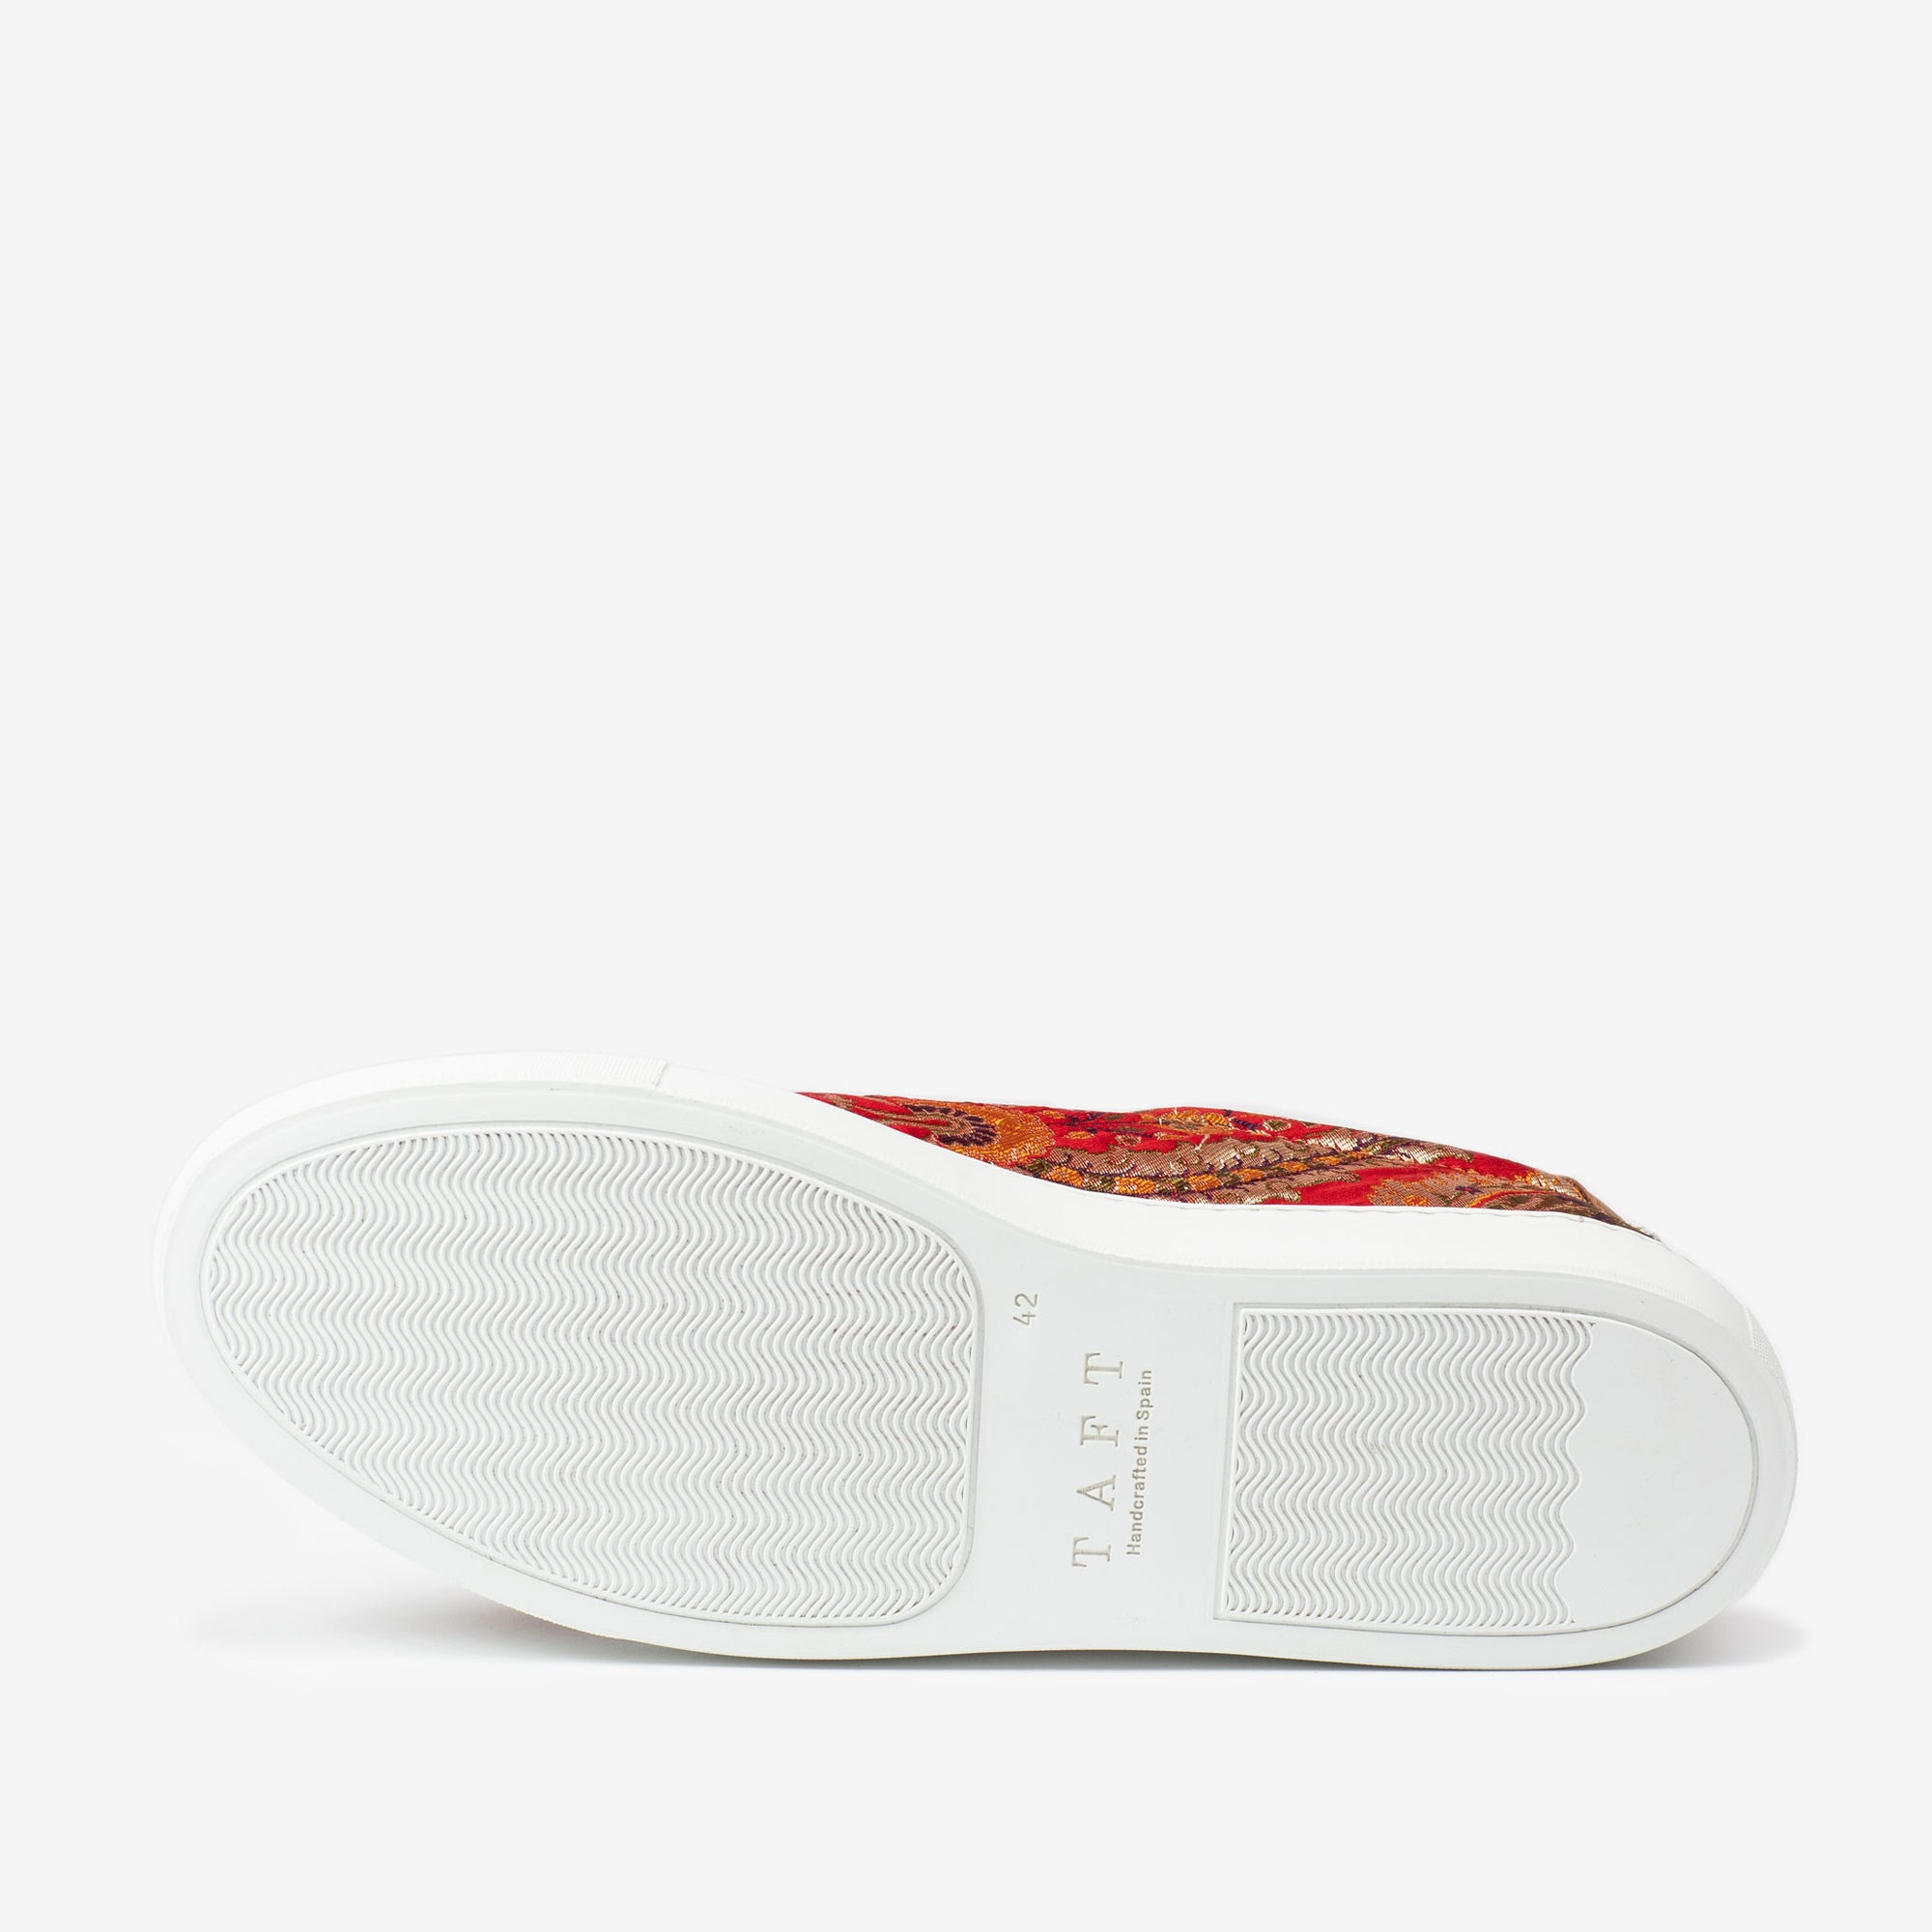 The Sneaker in Red Paisley Sole